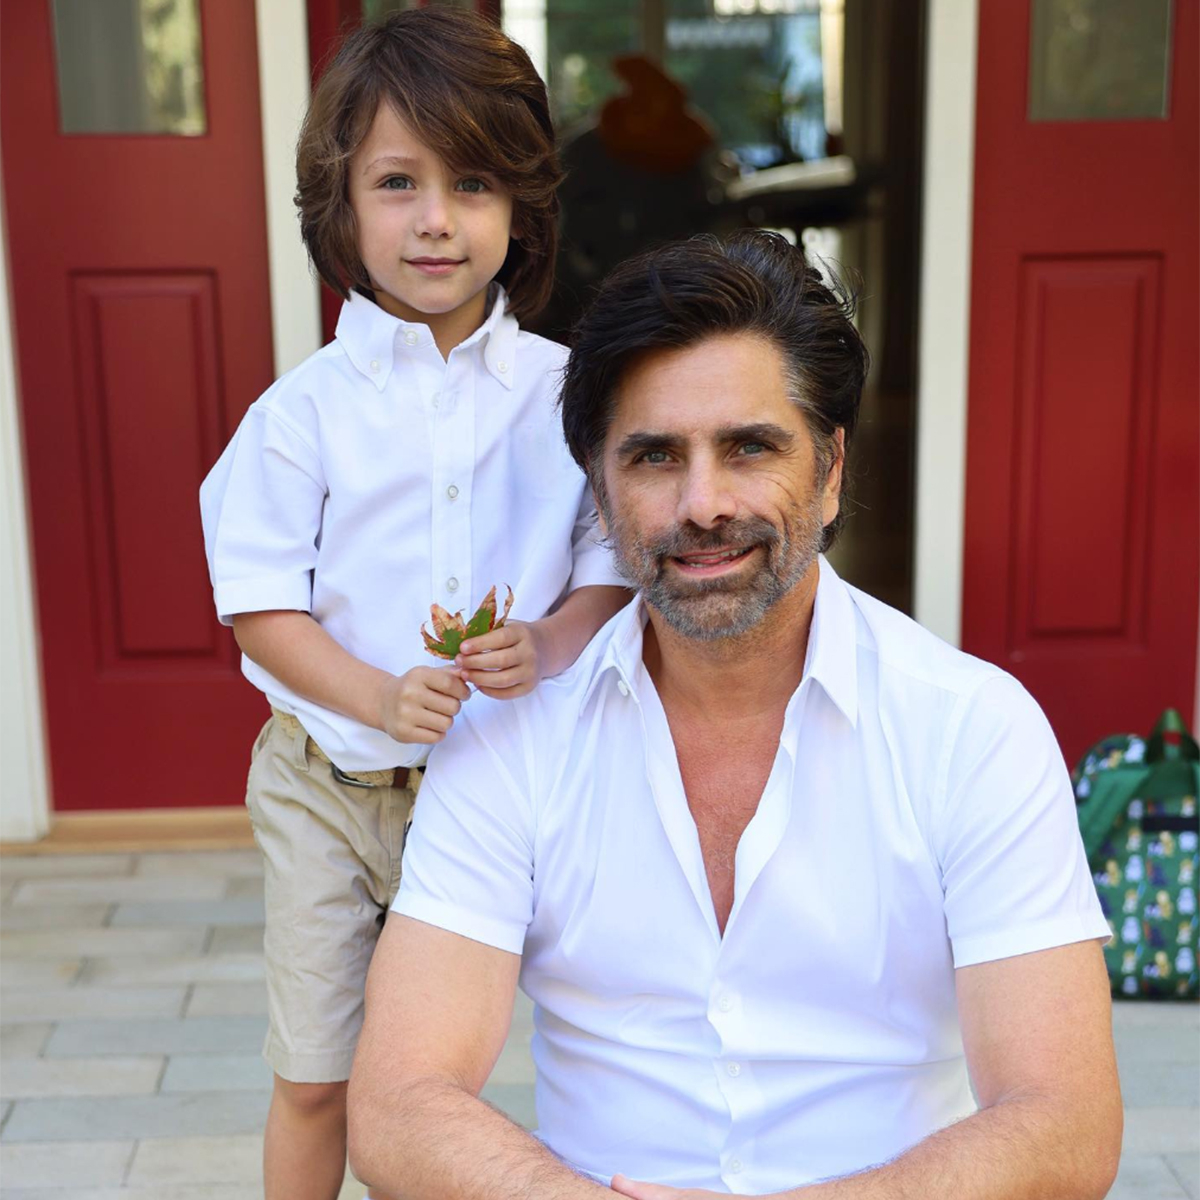 John Stamos’ Cutest Pics With His Son Billy